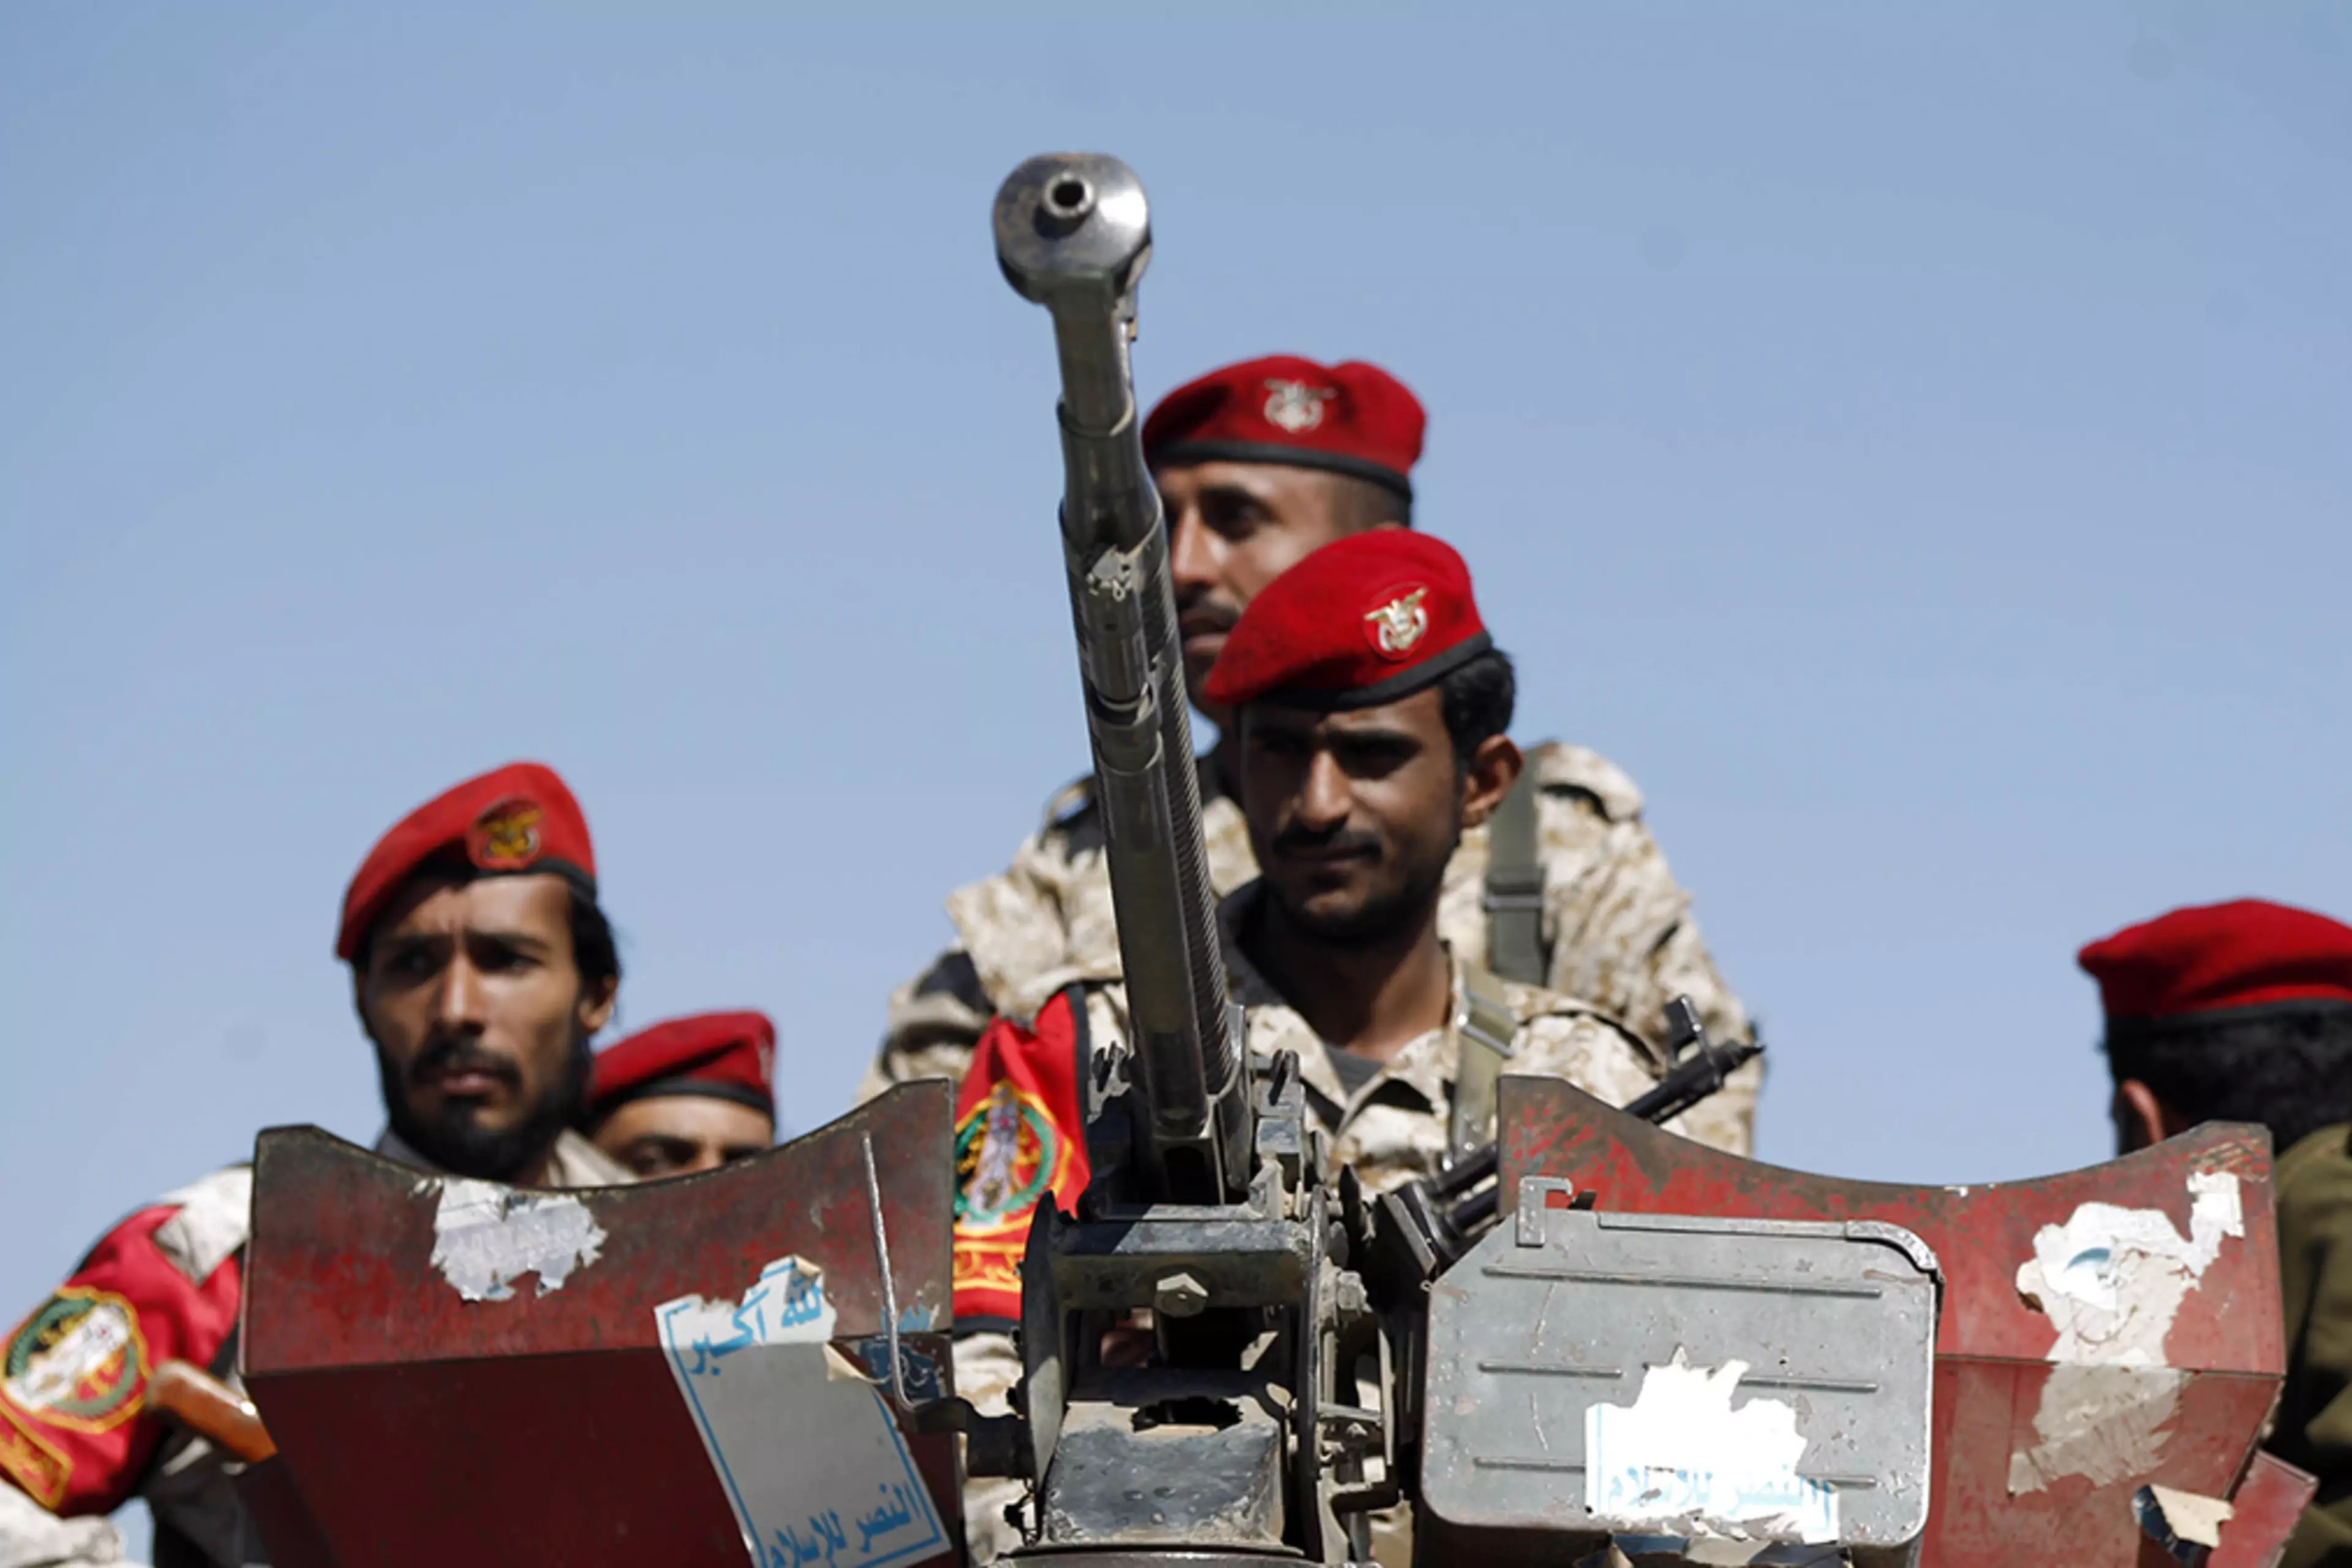 Members of the Houthi movement participate in a military parade in Yemen’s capital, Sanaa.